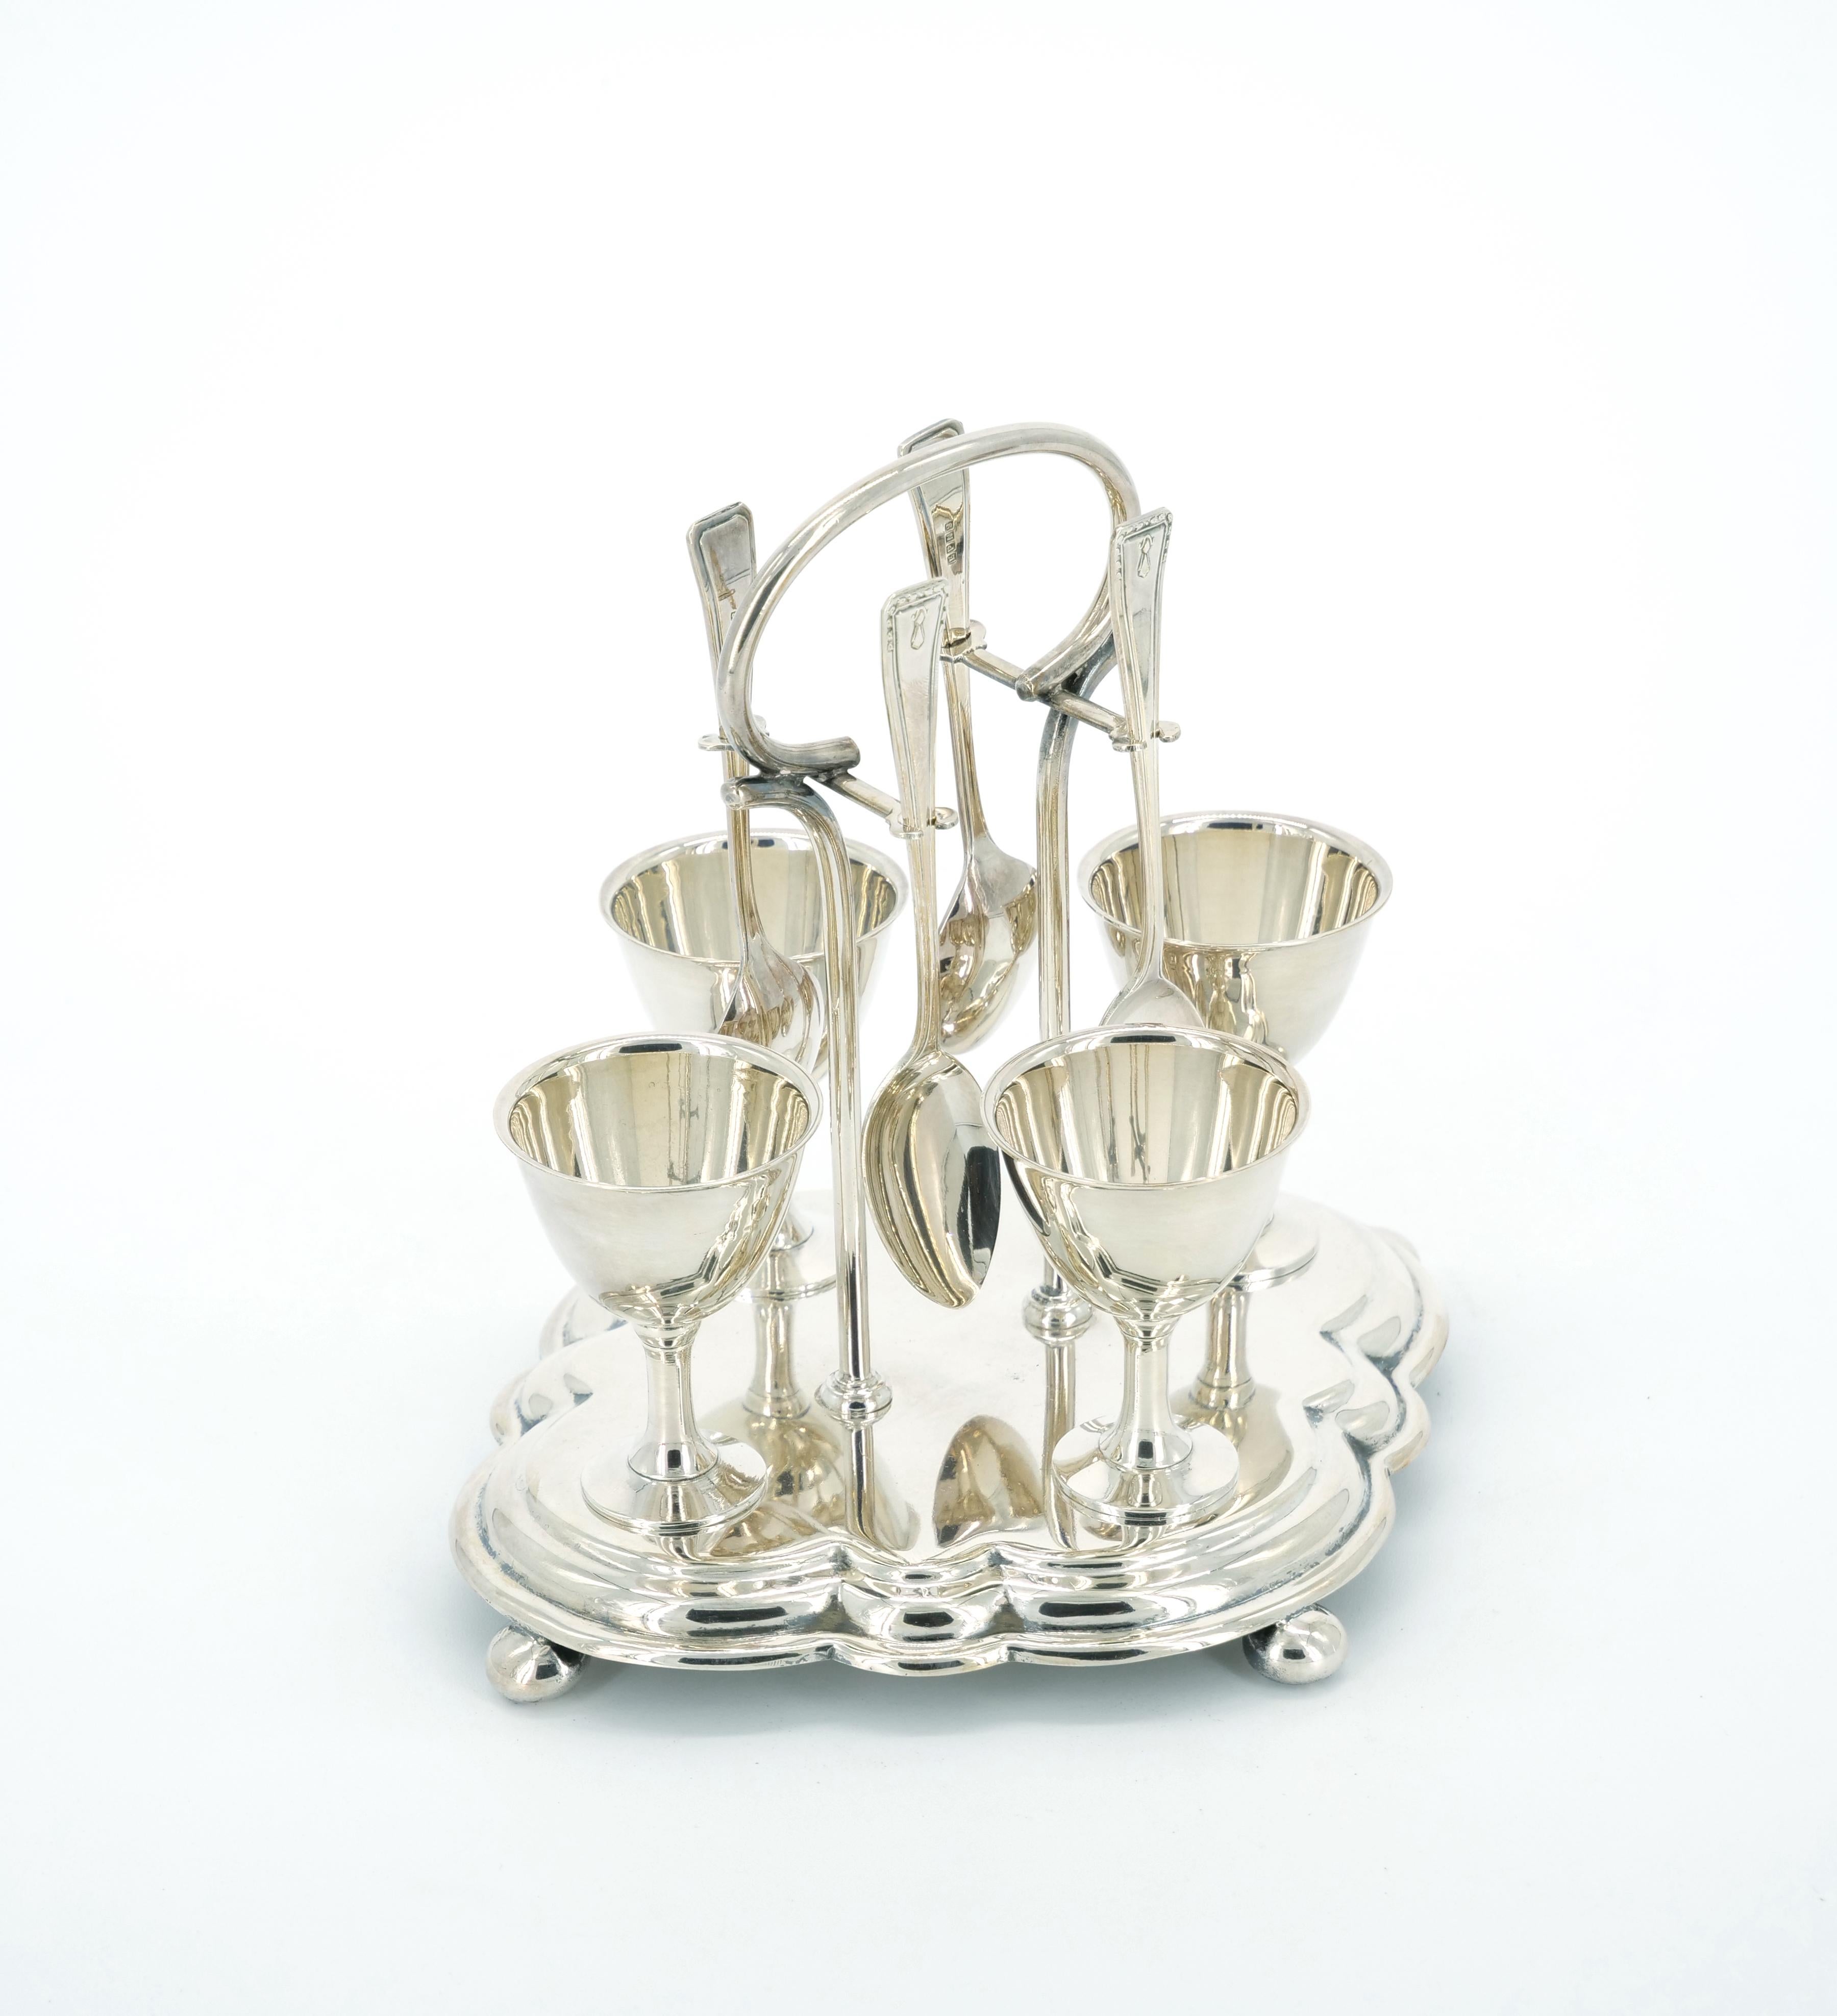 Transport yourself to the elegance of the 19th century with our English Silver-Plated Breakfast Tableware – a charming set of four soft-boiled egg holders accompanied by four dainty spoons. This exquisite service is a testament to the timeless